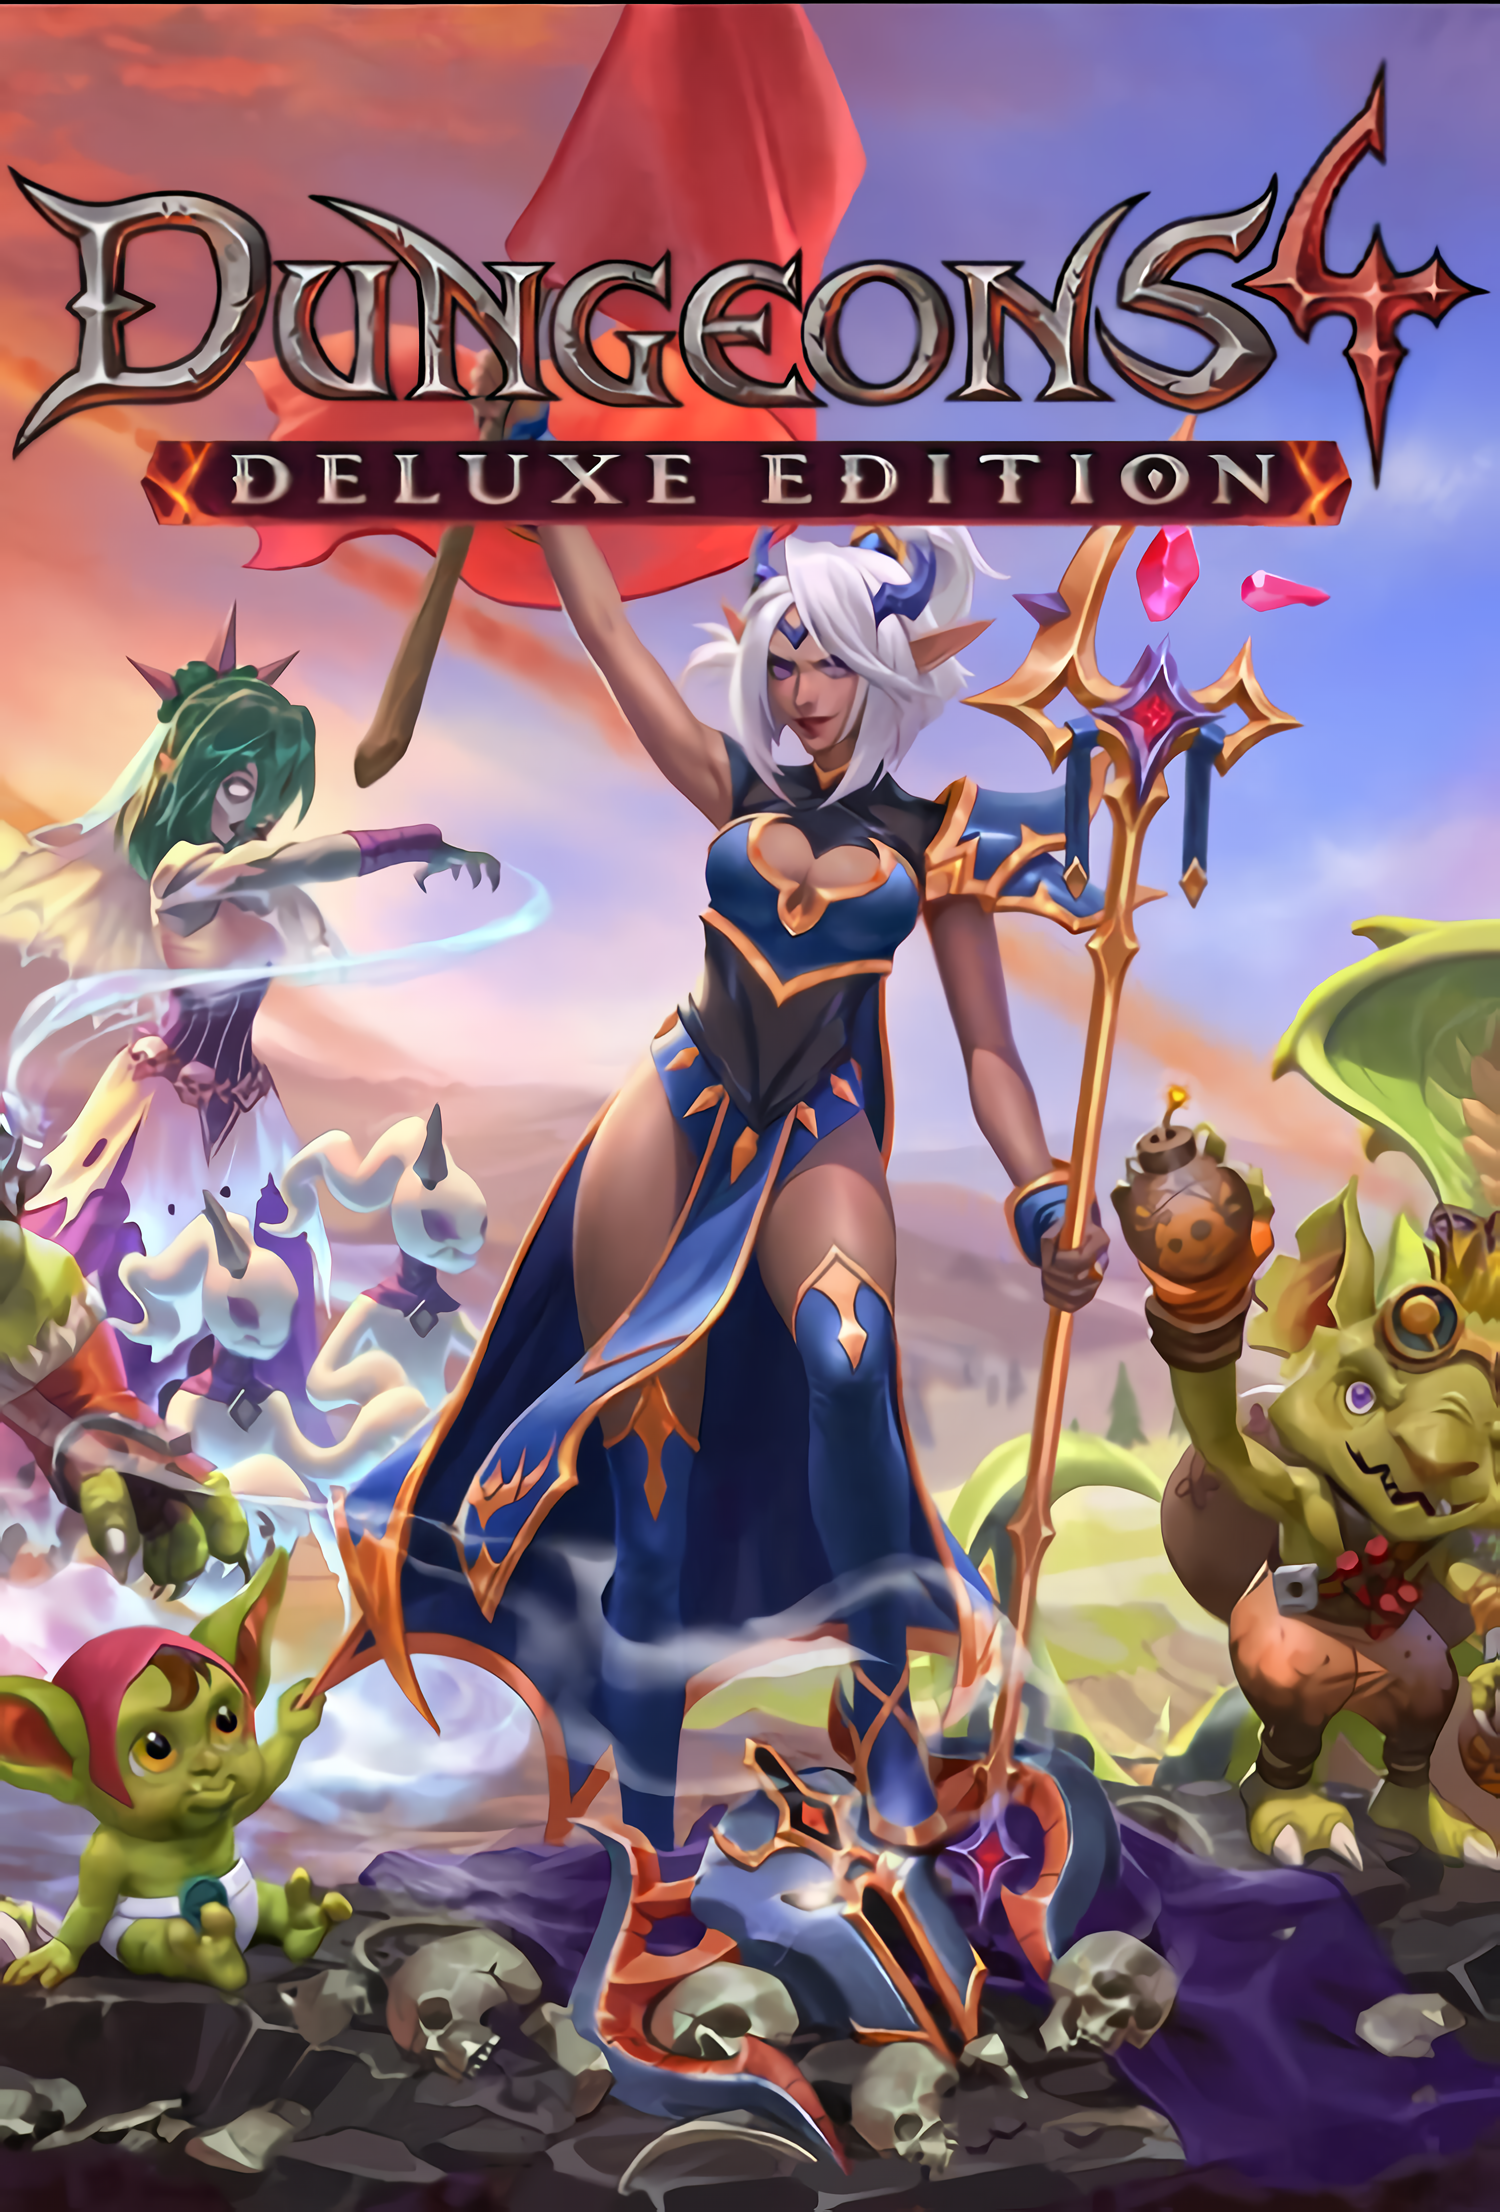 dungeons 4. deluxe edition [pc